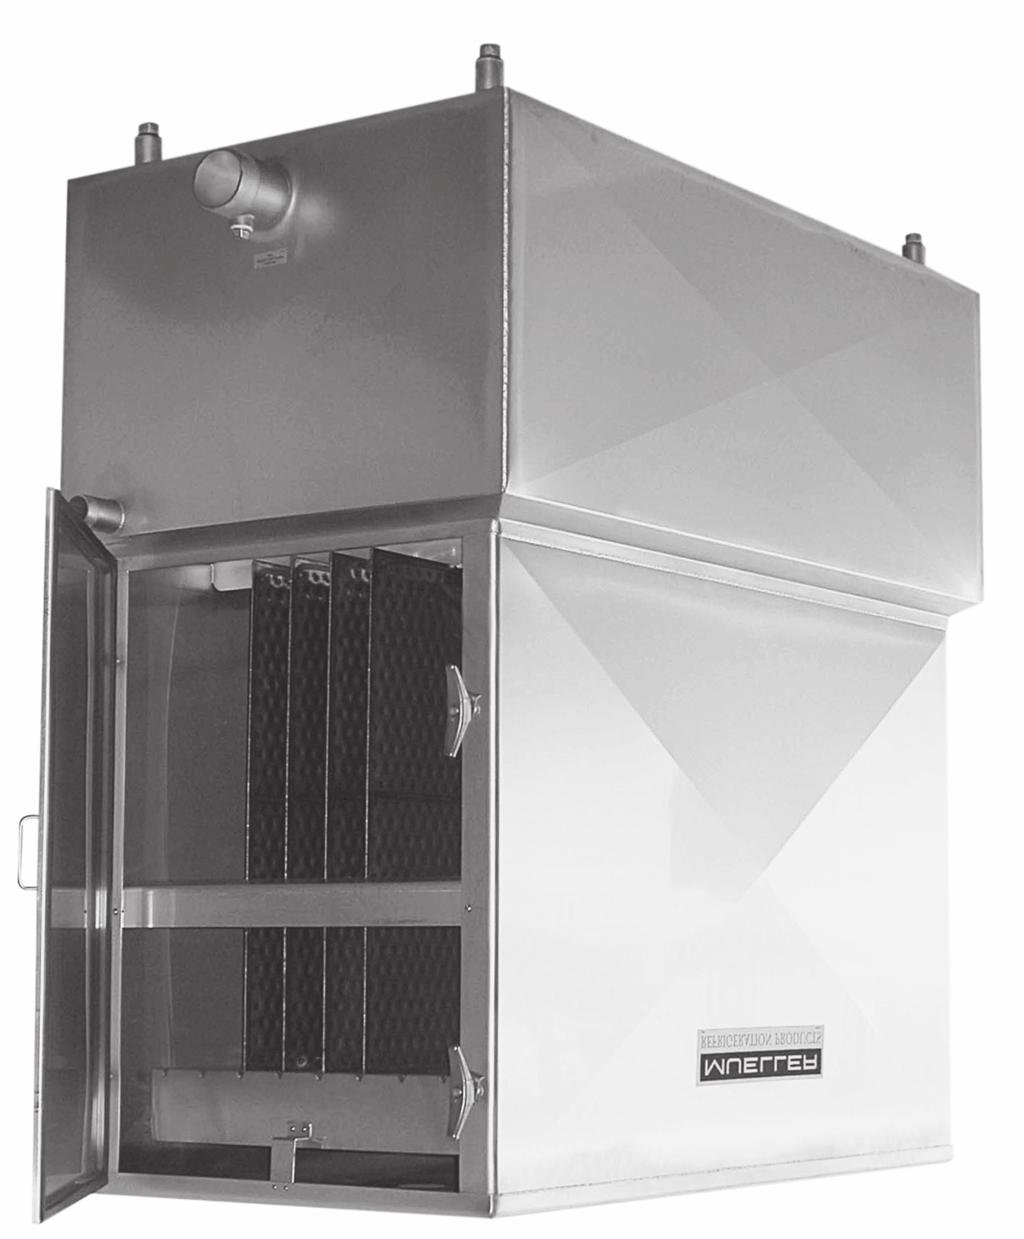 3 x 5 Chillers The Mueller 3 x 5 falling film chiller reduces chilling time, increases production, and brings a faster return on your investment.